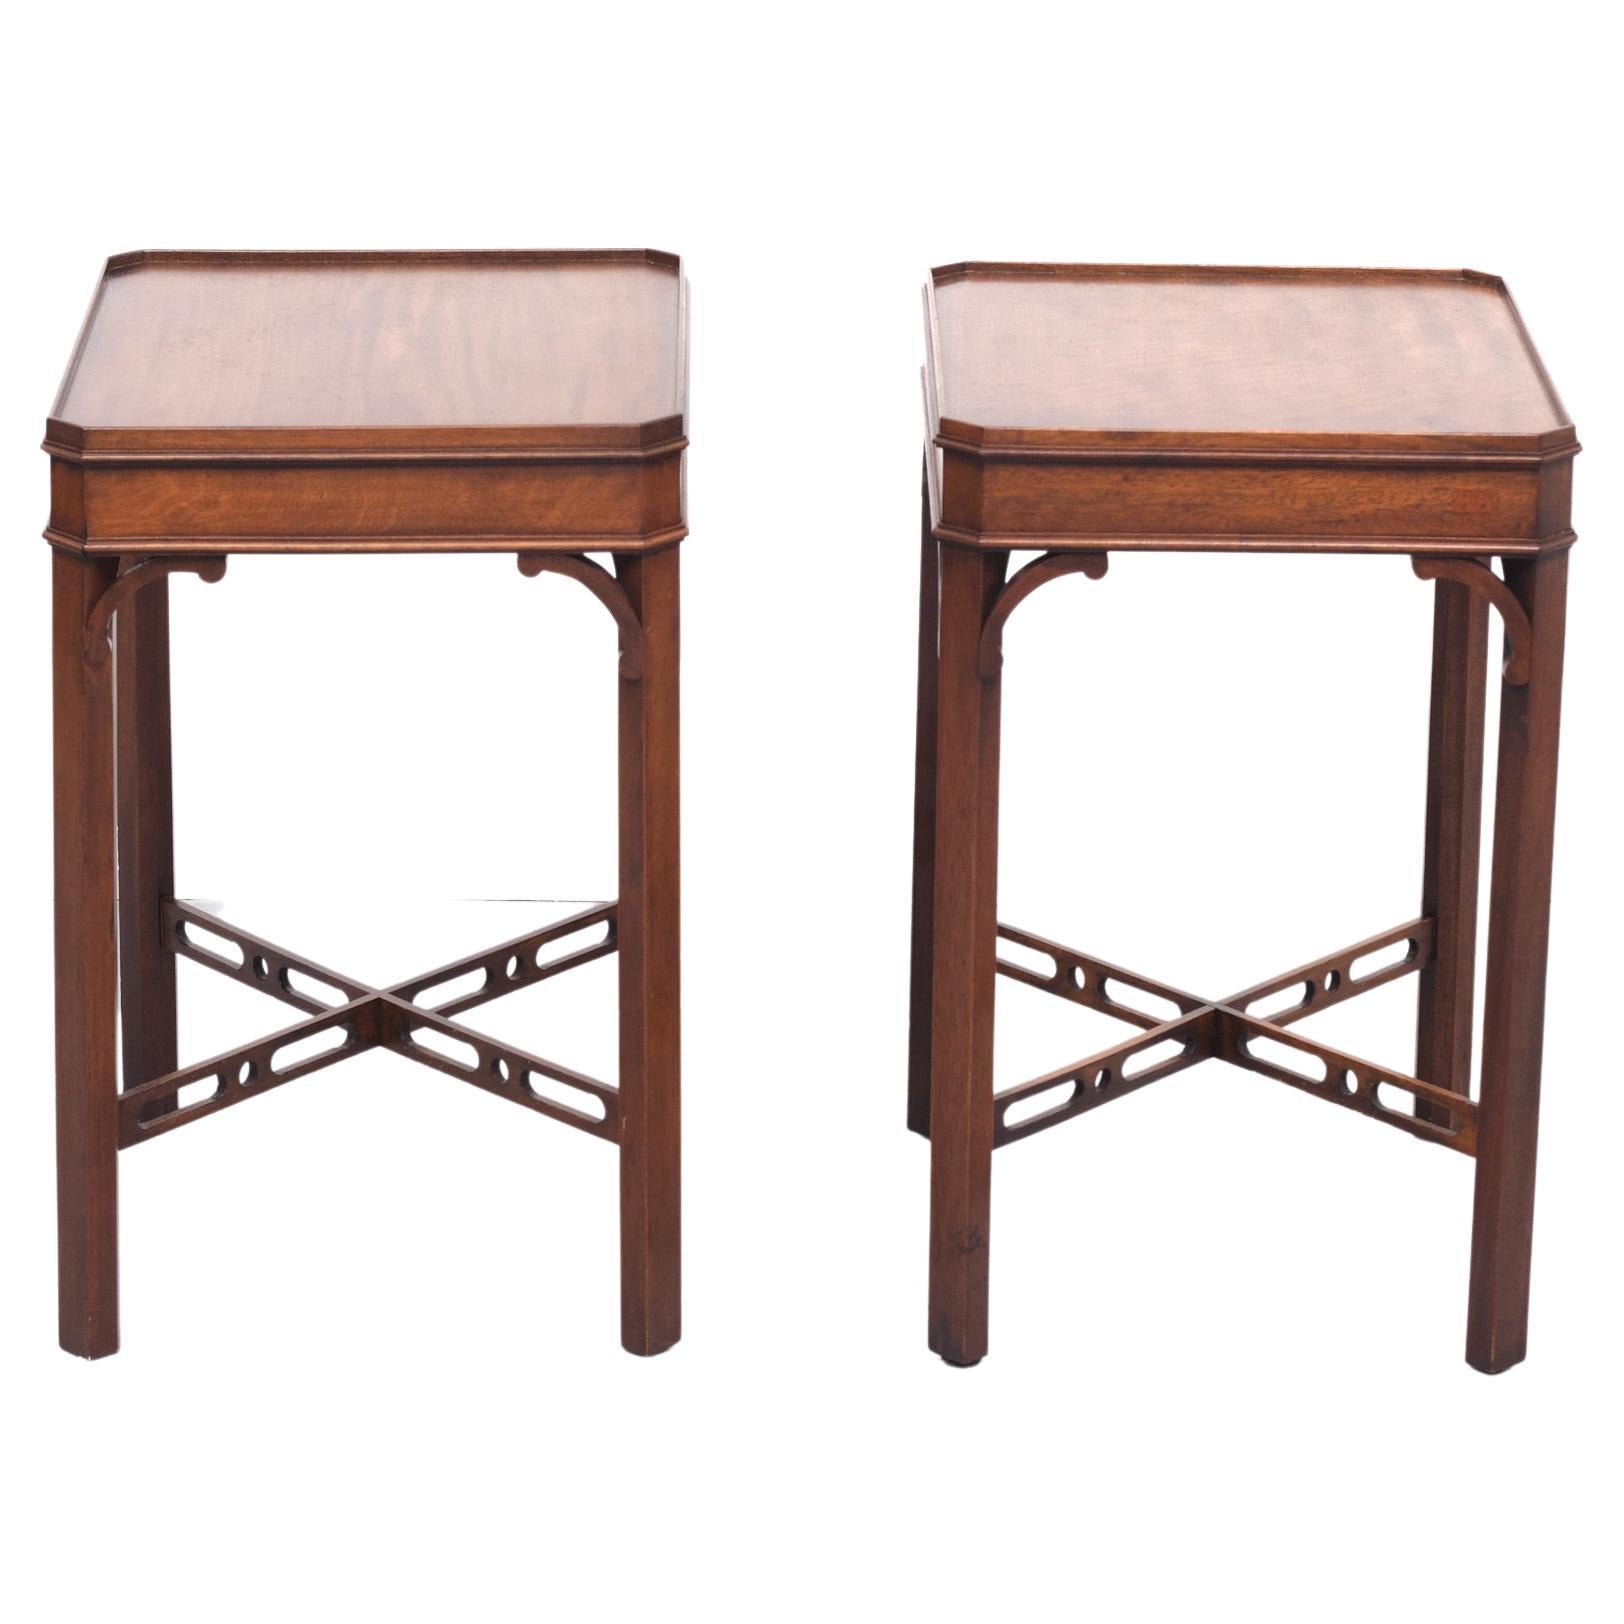 Bevan Funnell  Mahogany Side Tables  Georgian revival    England, 1960s